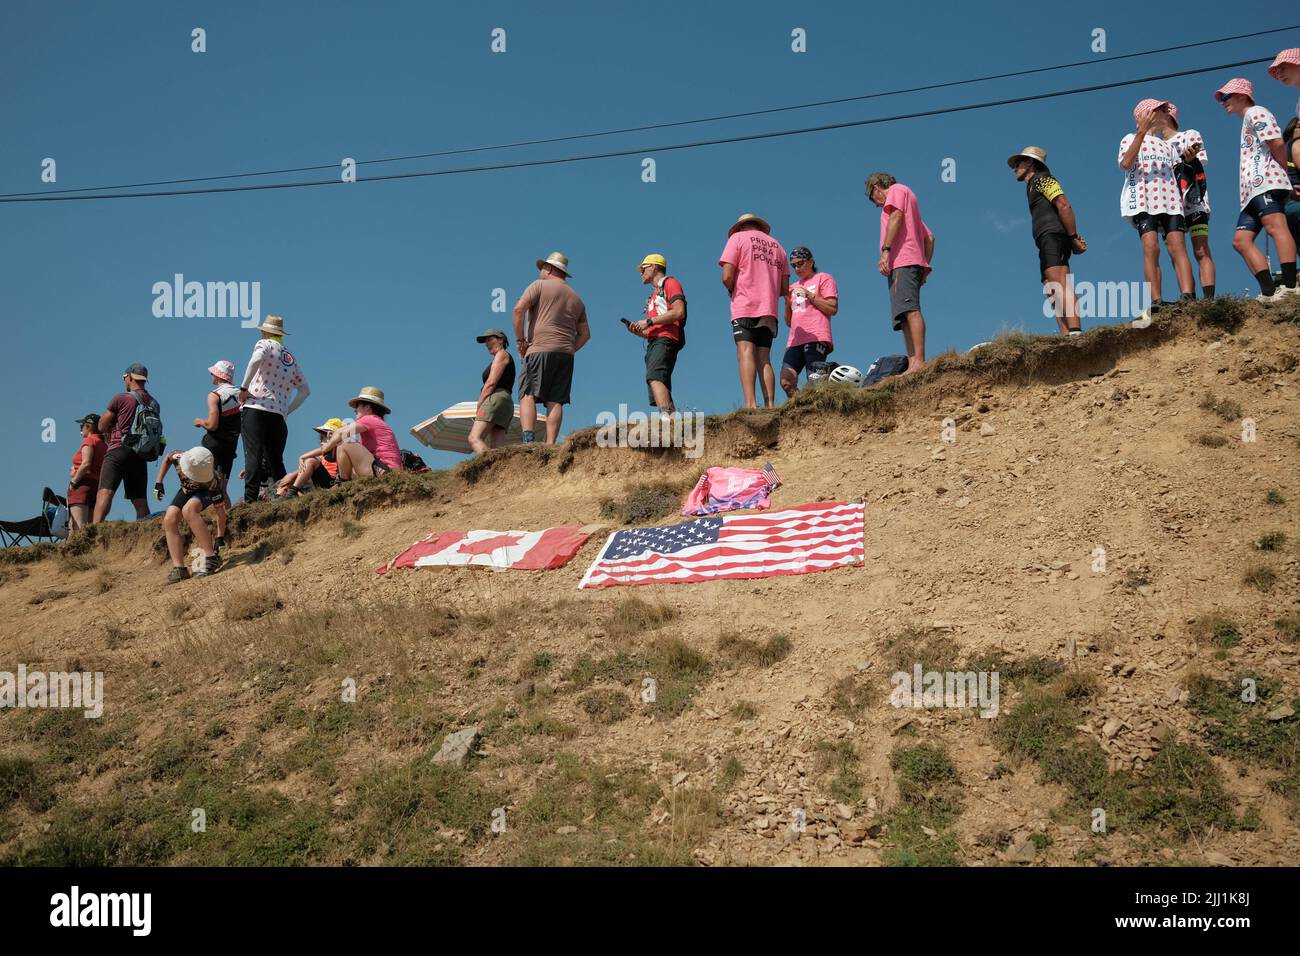 Canadian and American flags on the ground. Atmospheres and portraits taken during the 18th stage of the Tour de France, between Lourdes and Hautacam, in the Pyrenees. July 21, 2022. Photo by Patrick Batard/ABACAPRESS.COM Credit: Abaca Press/Alamy Live News Stock Photo